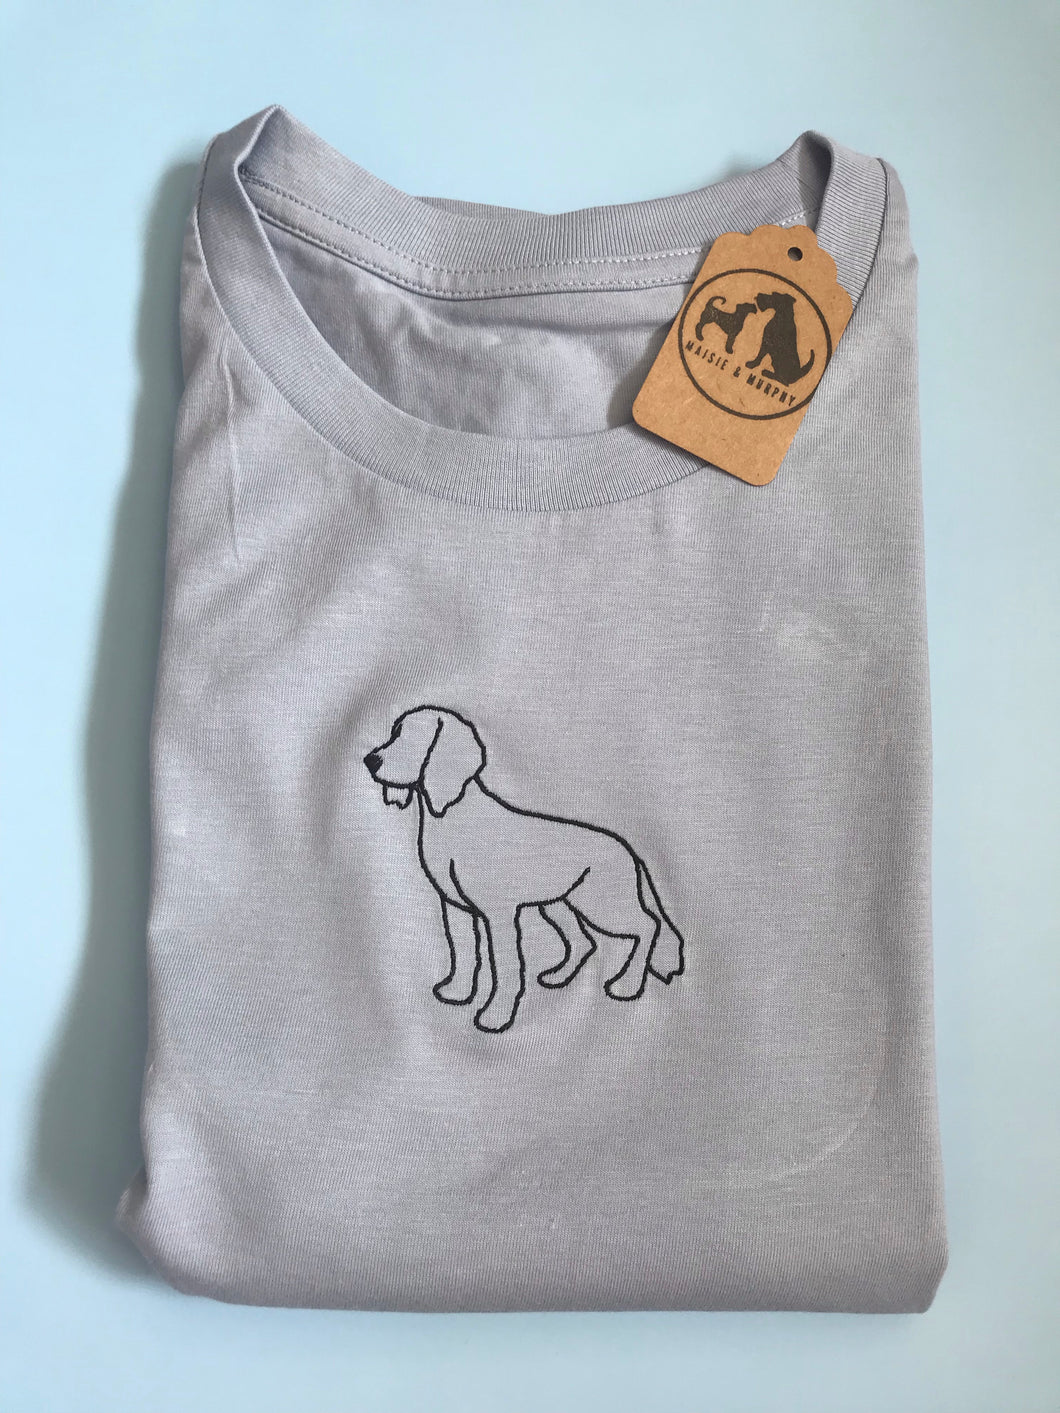 Cocker Spaniel T-shirt - Gifts for Dog Lovers and Owners